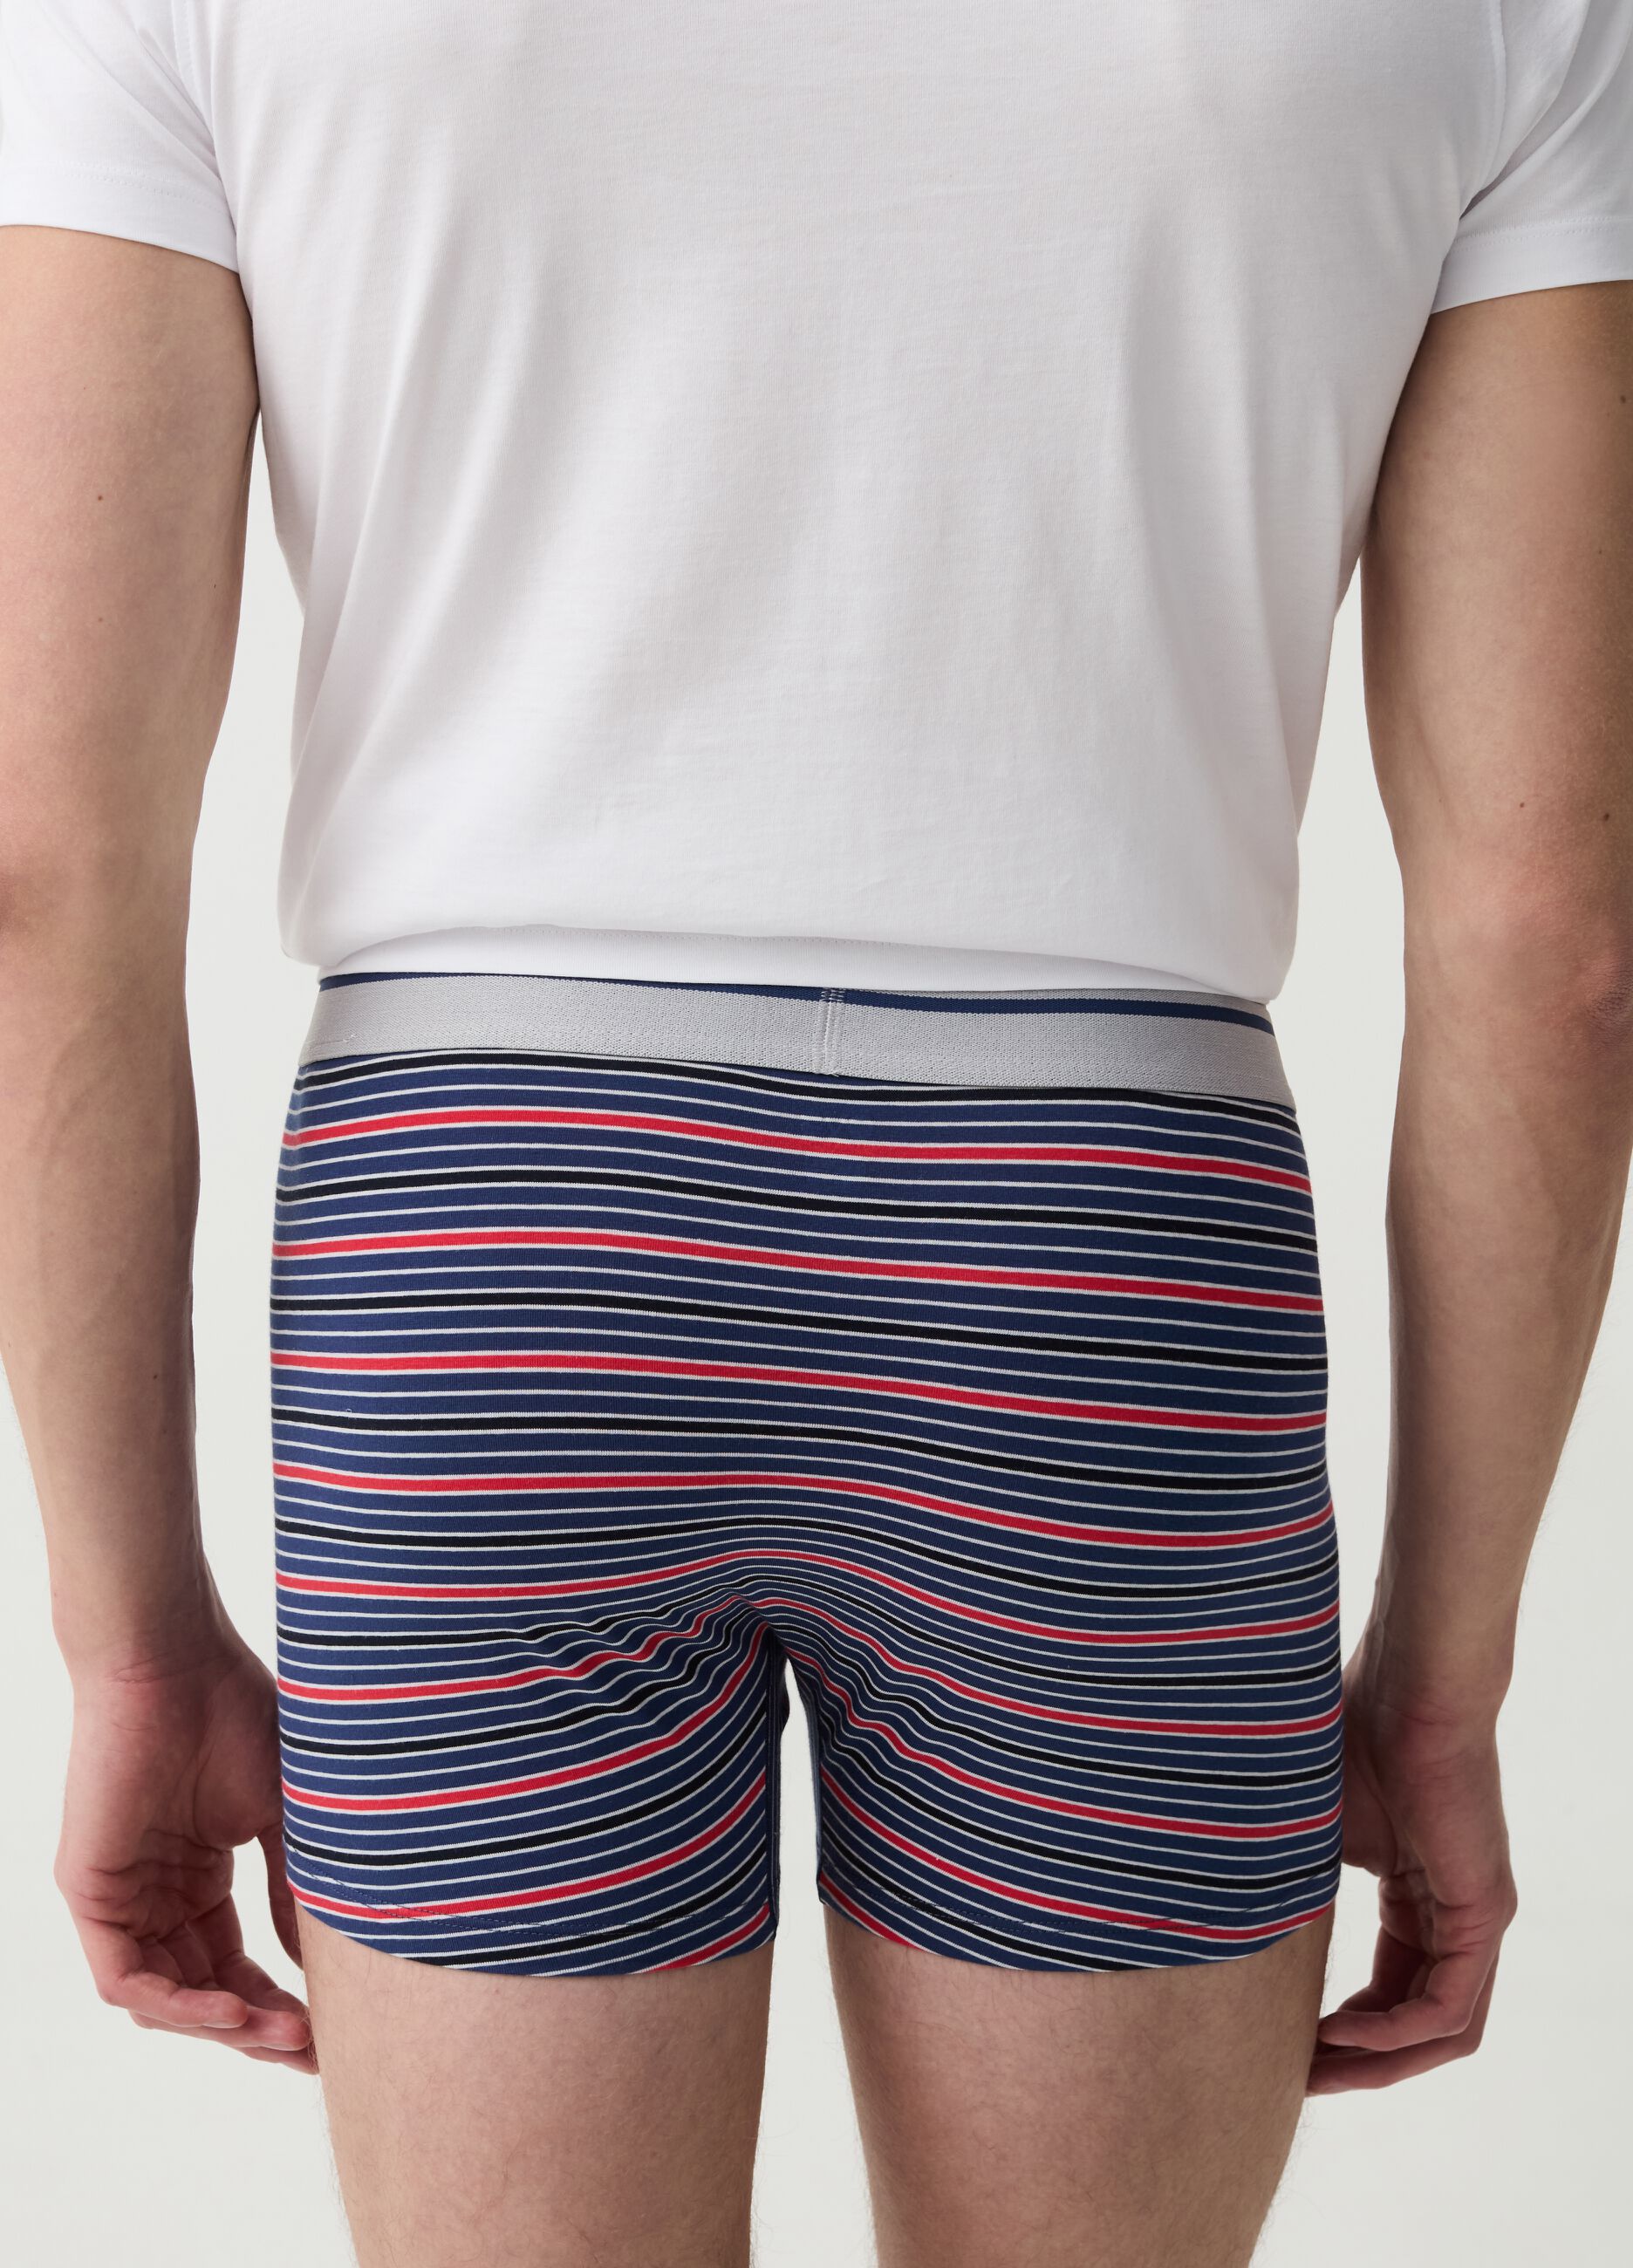 Three-pack boxer shorts with striped patterned edging